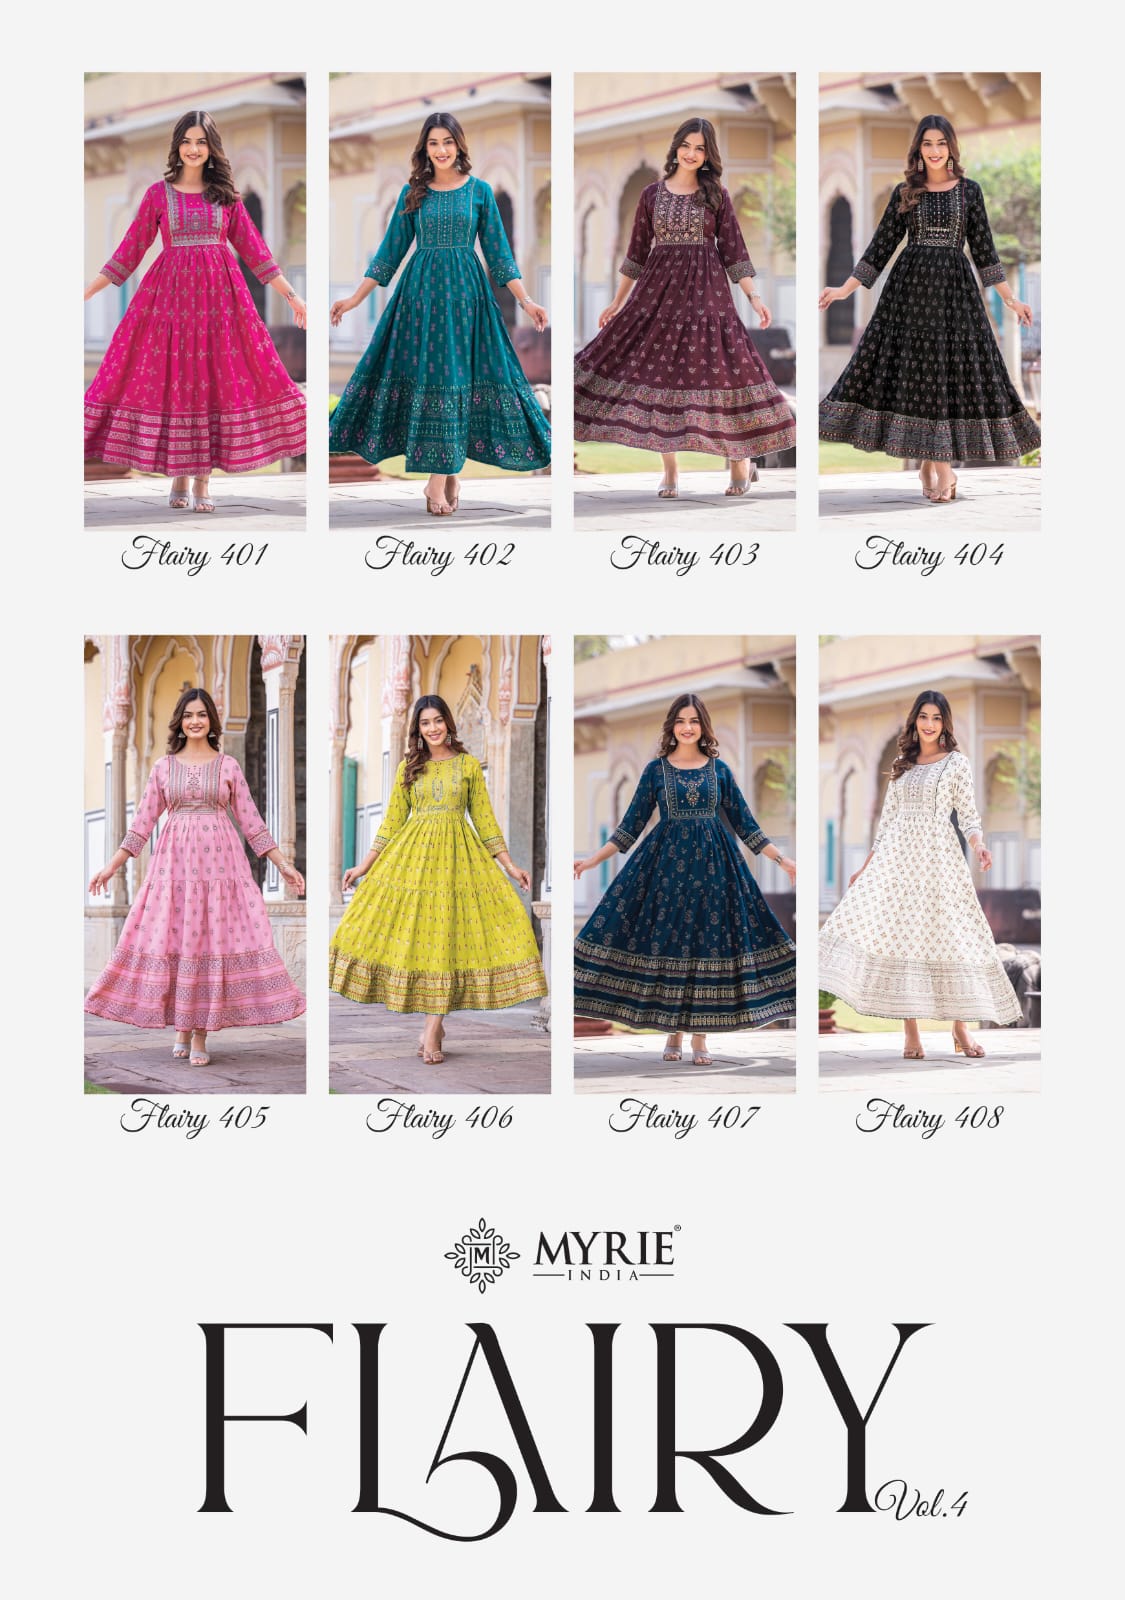 Myrie Flairy Vol 4 collection 5